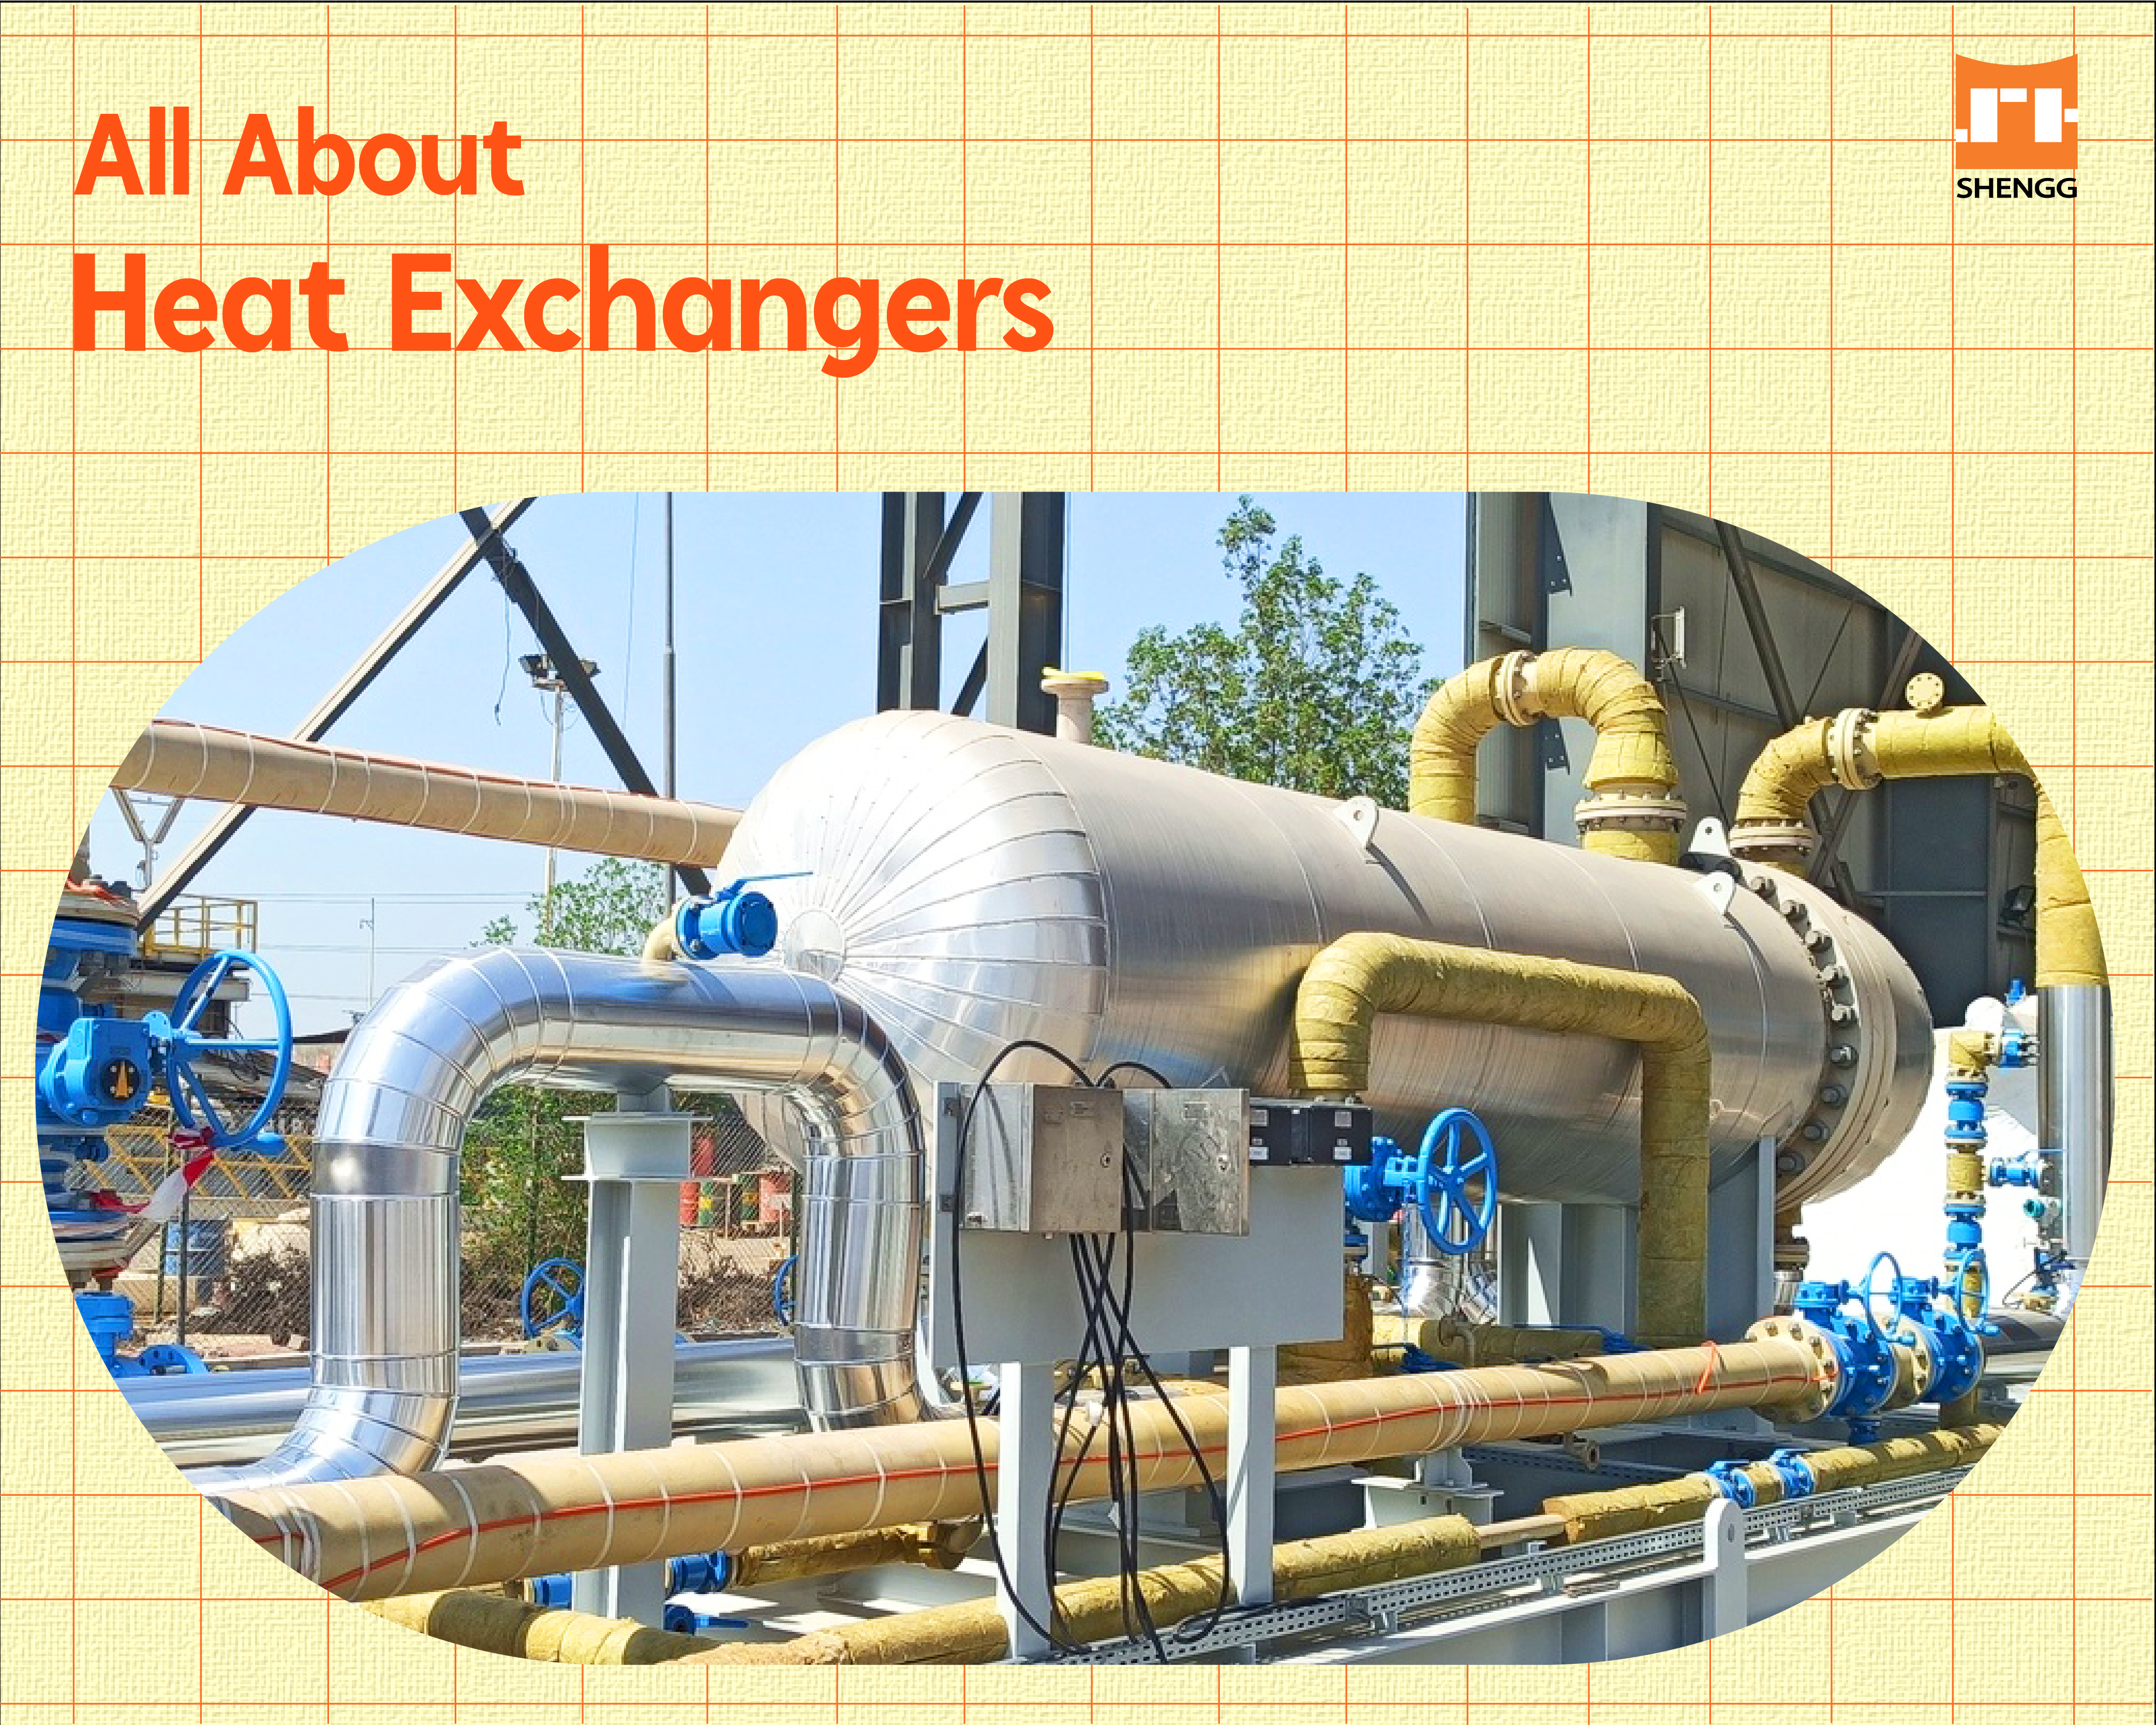 All About: Heat Exchangers